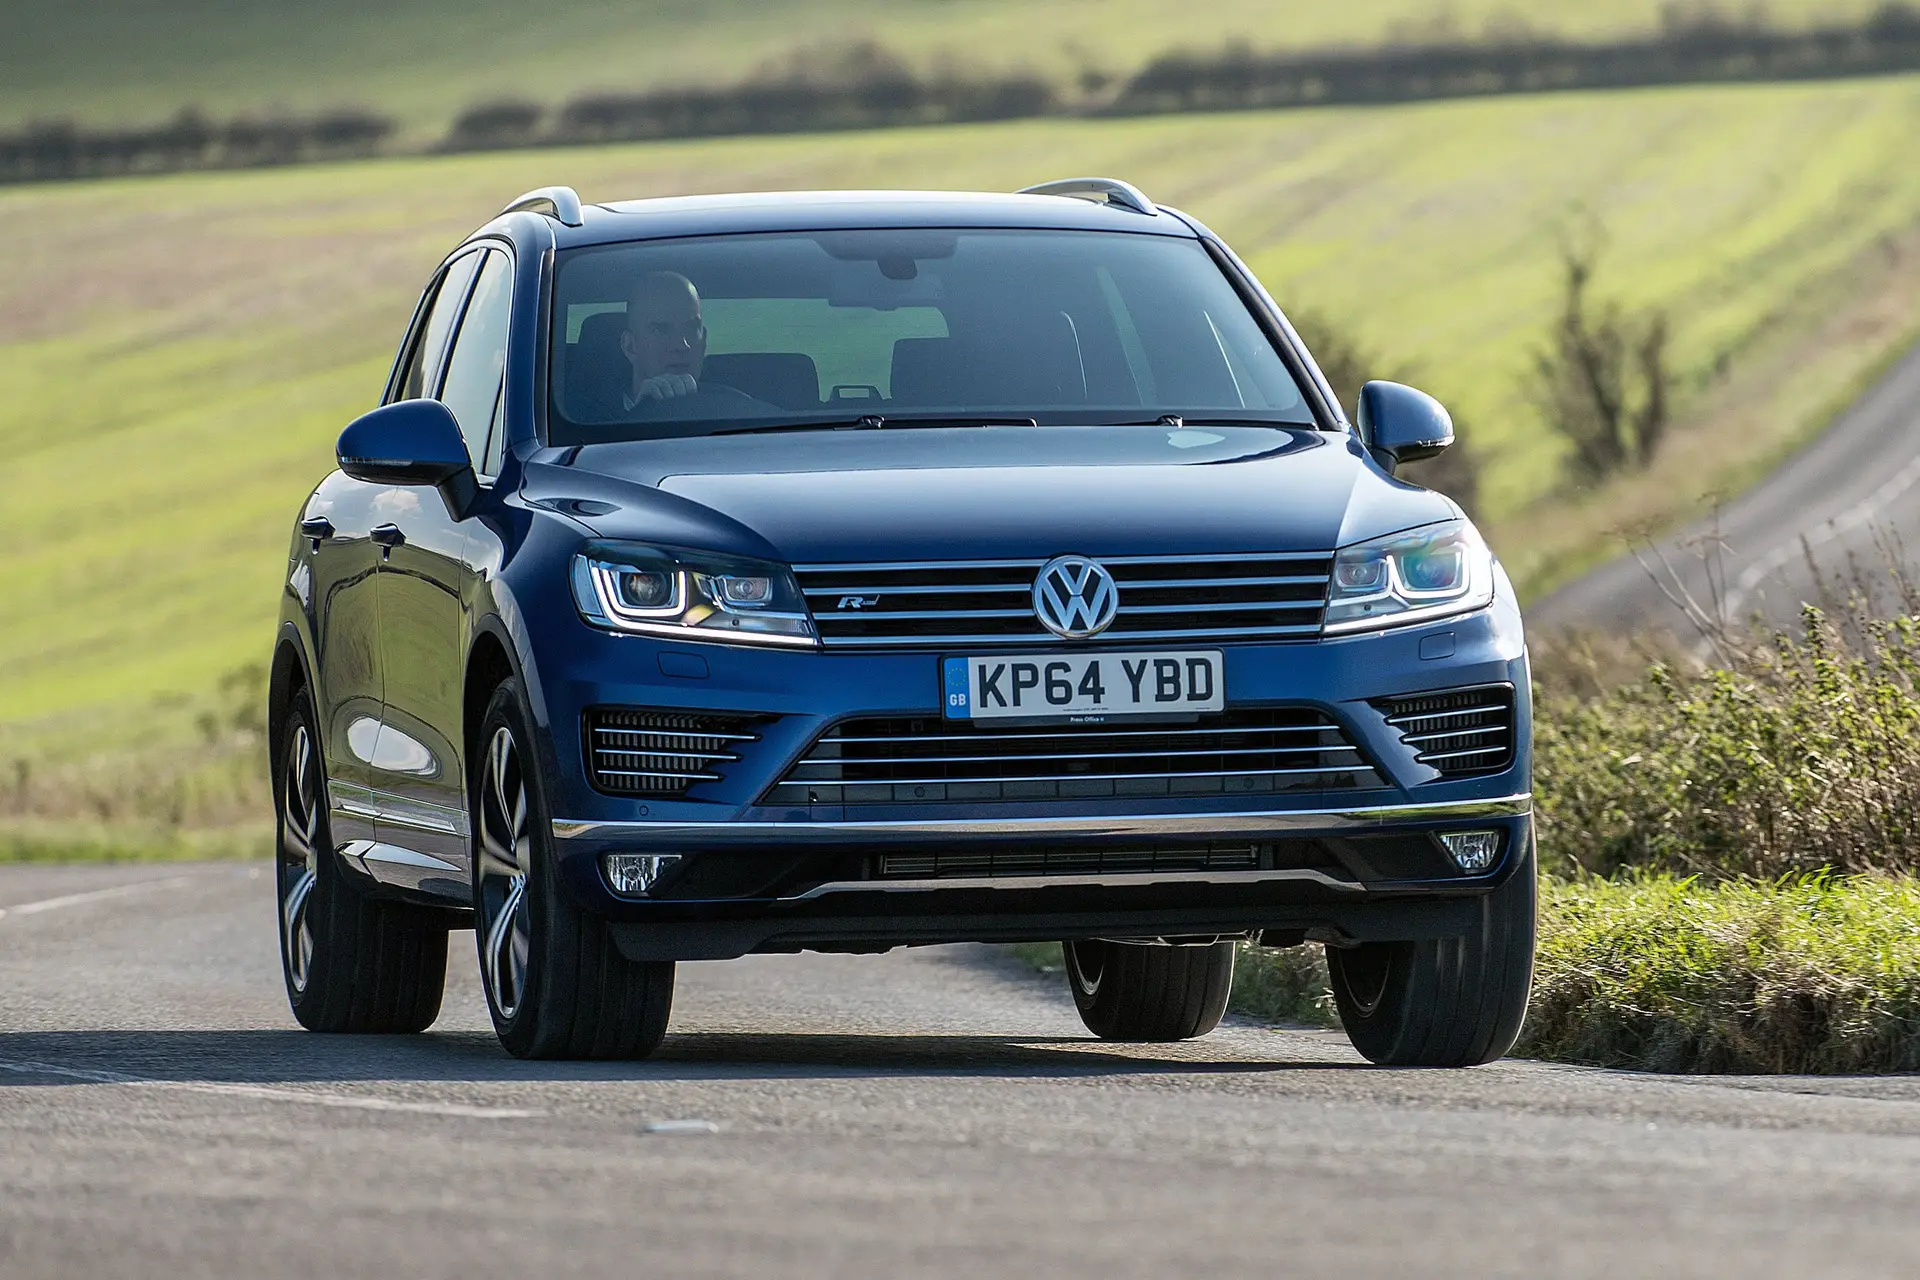 Used Volkswagen Touareg Estate (2010 - 2018) Review